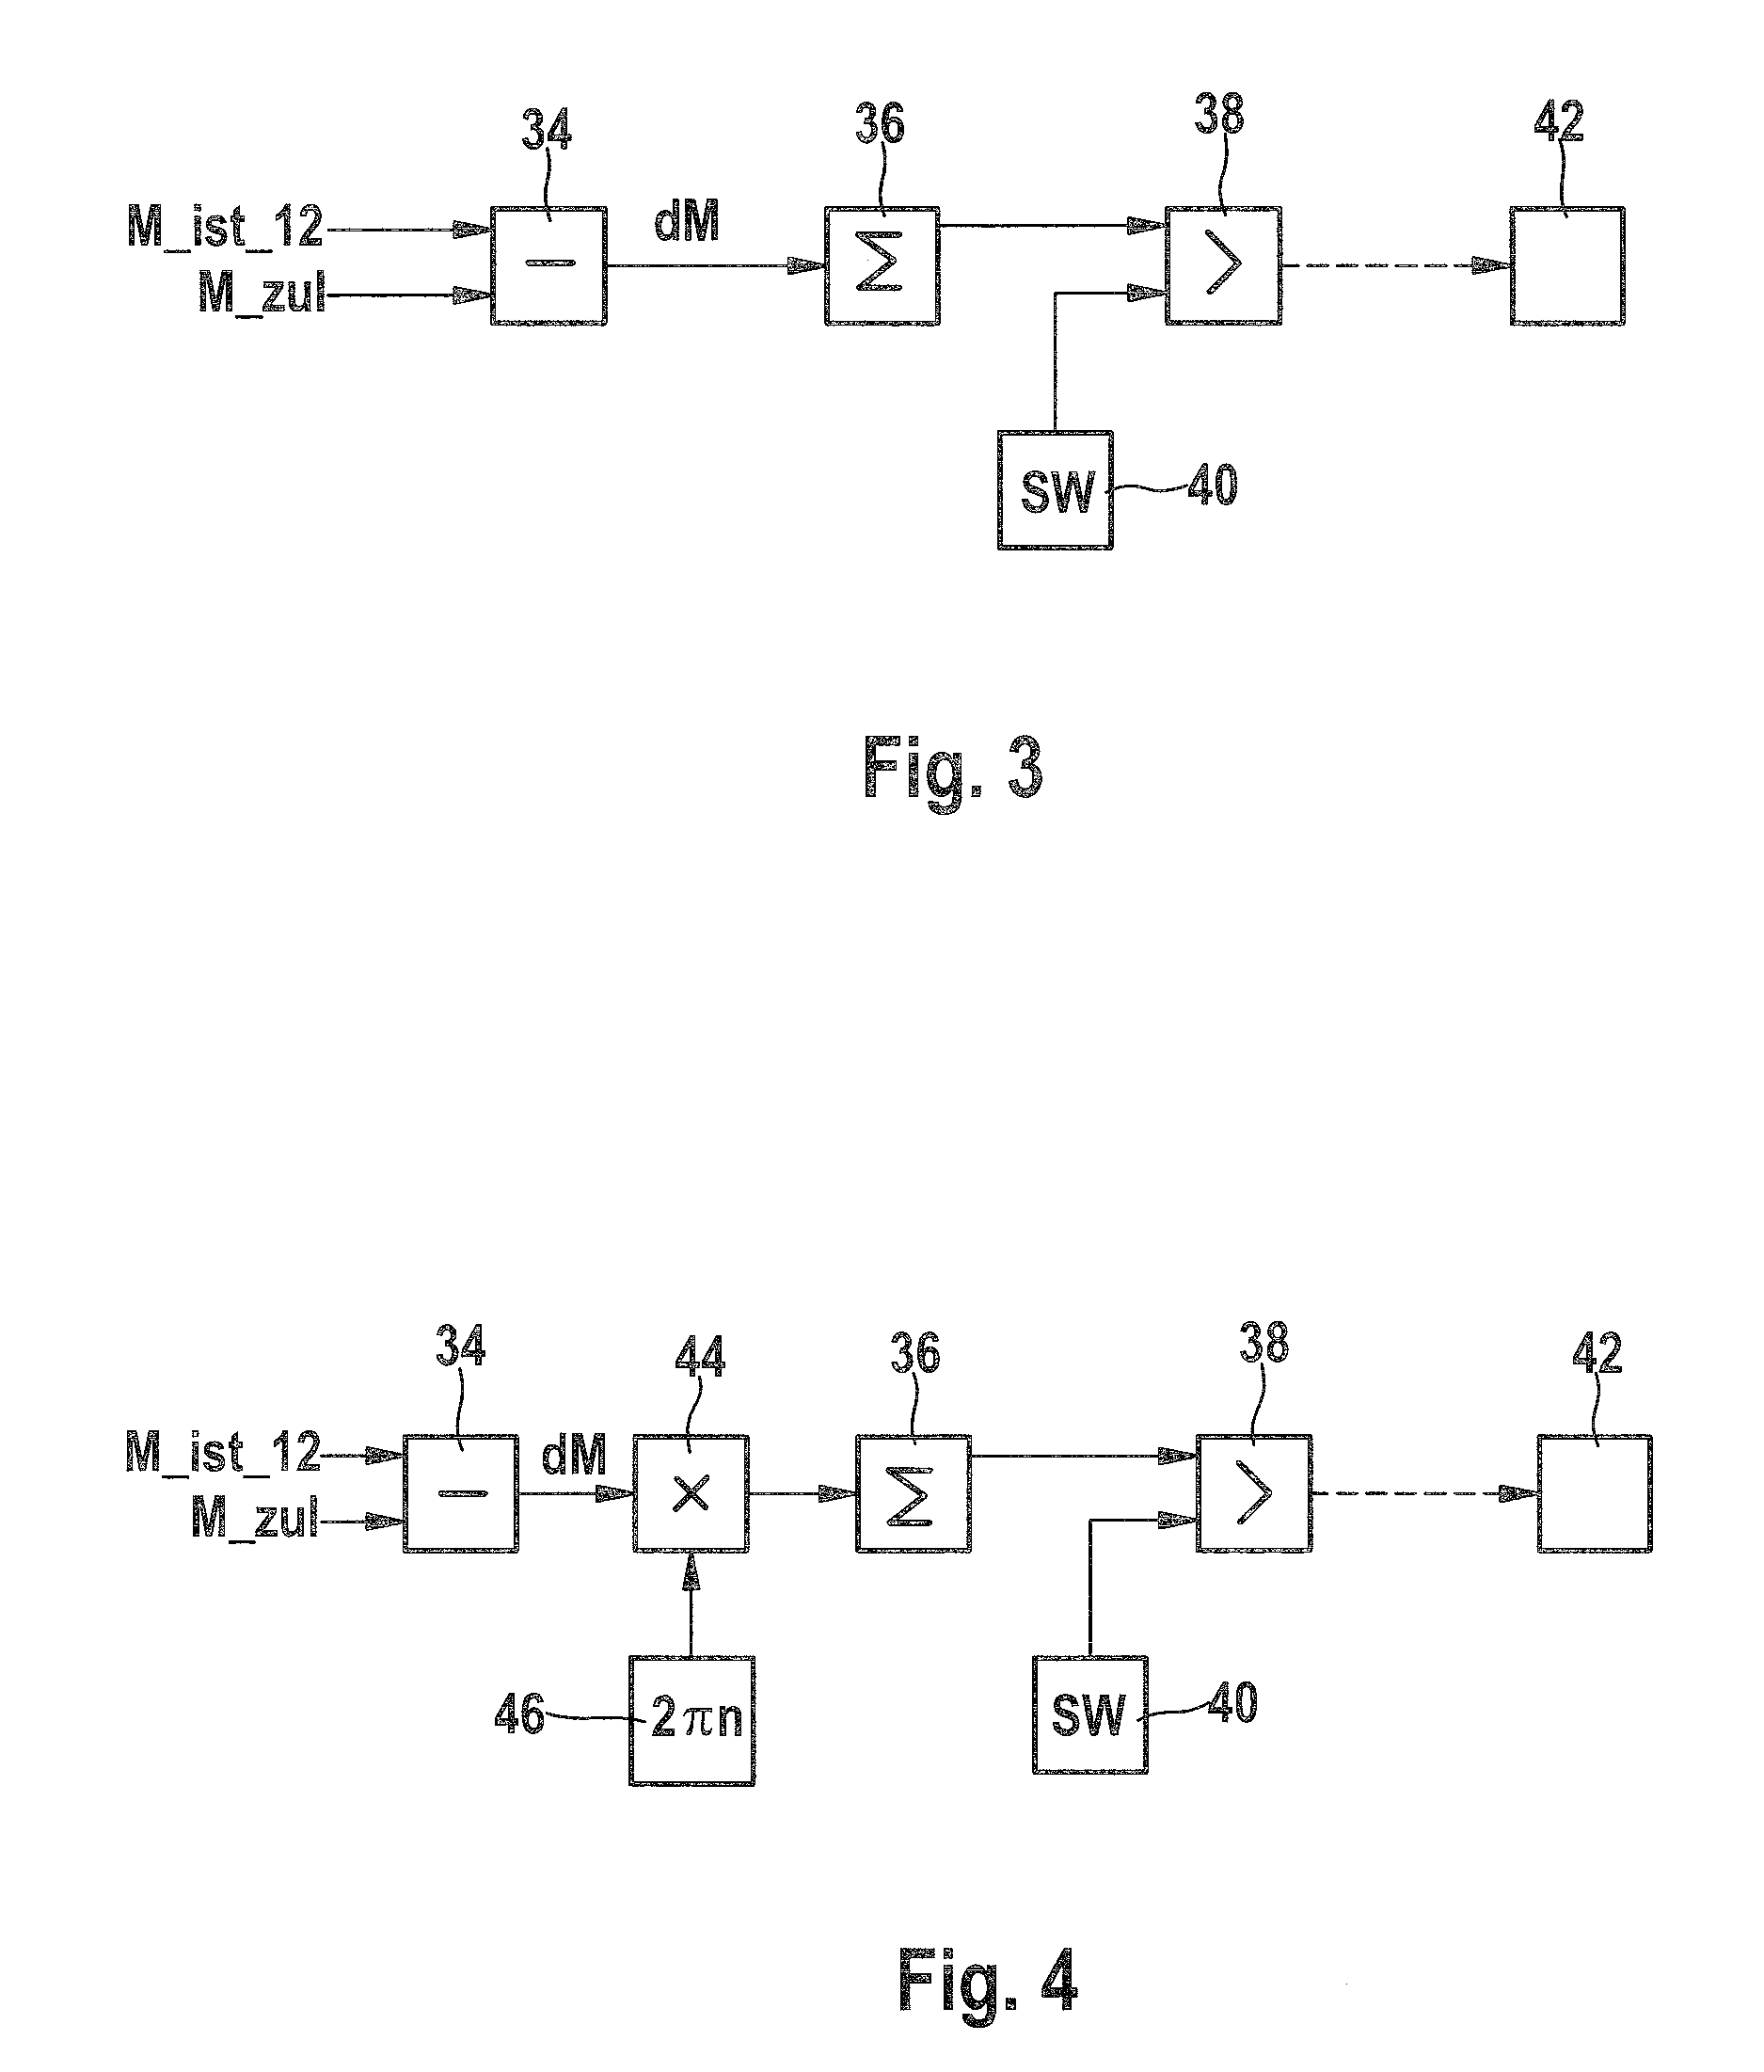 Method and control device for monitoring and limiting the torque in a drive train of a road motor vehicle